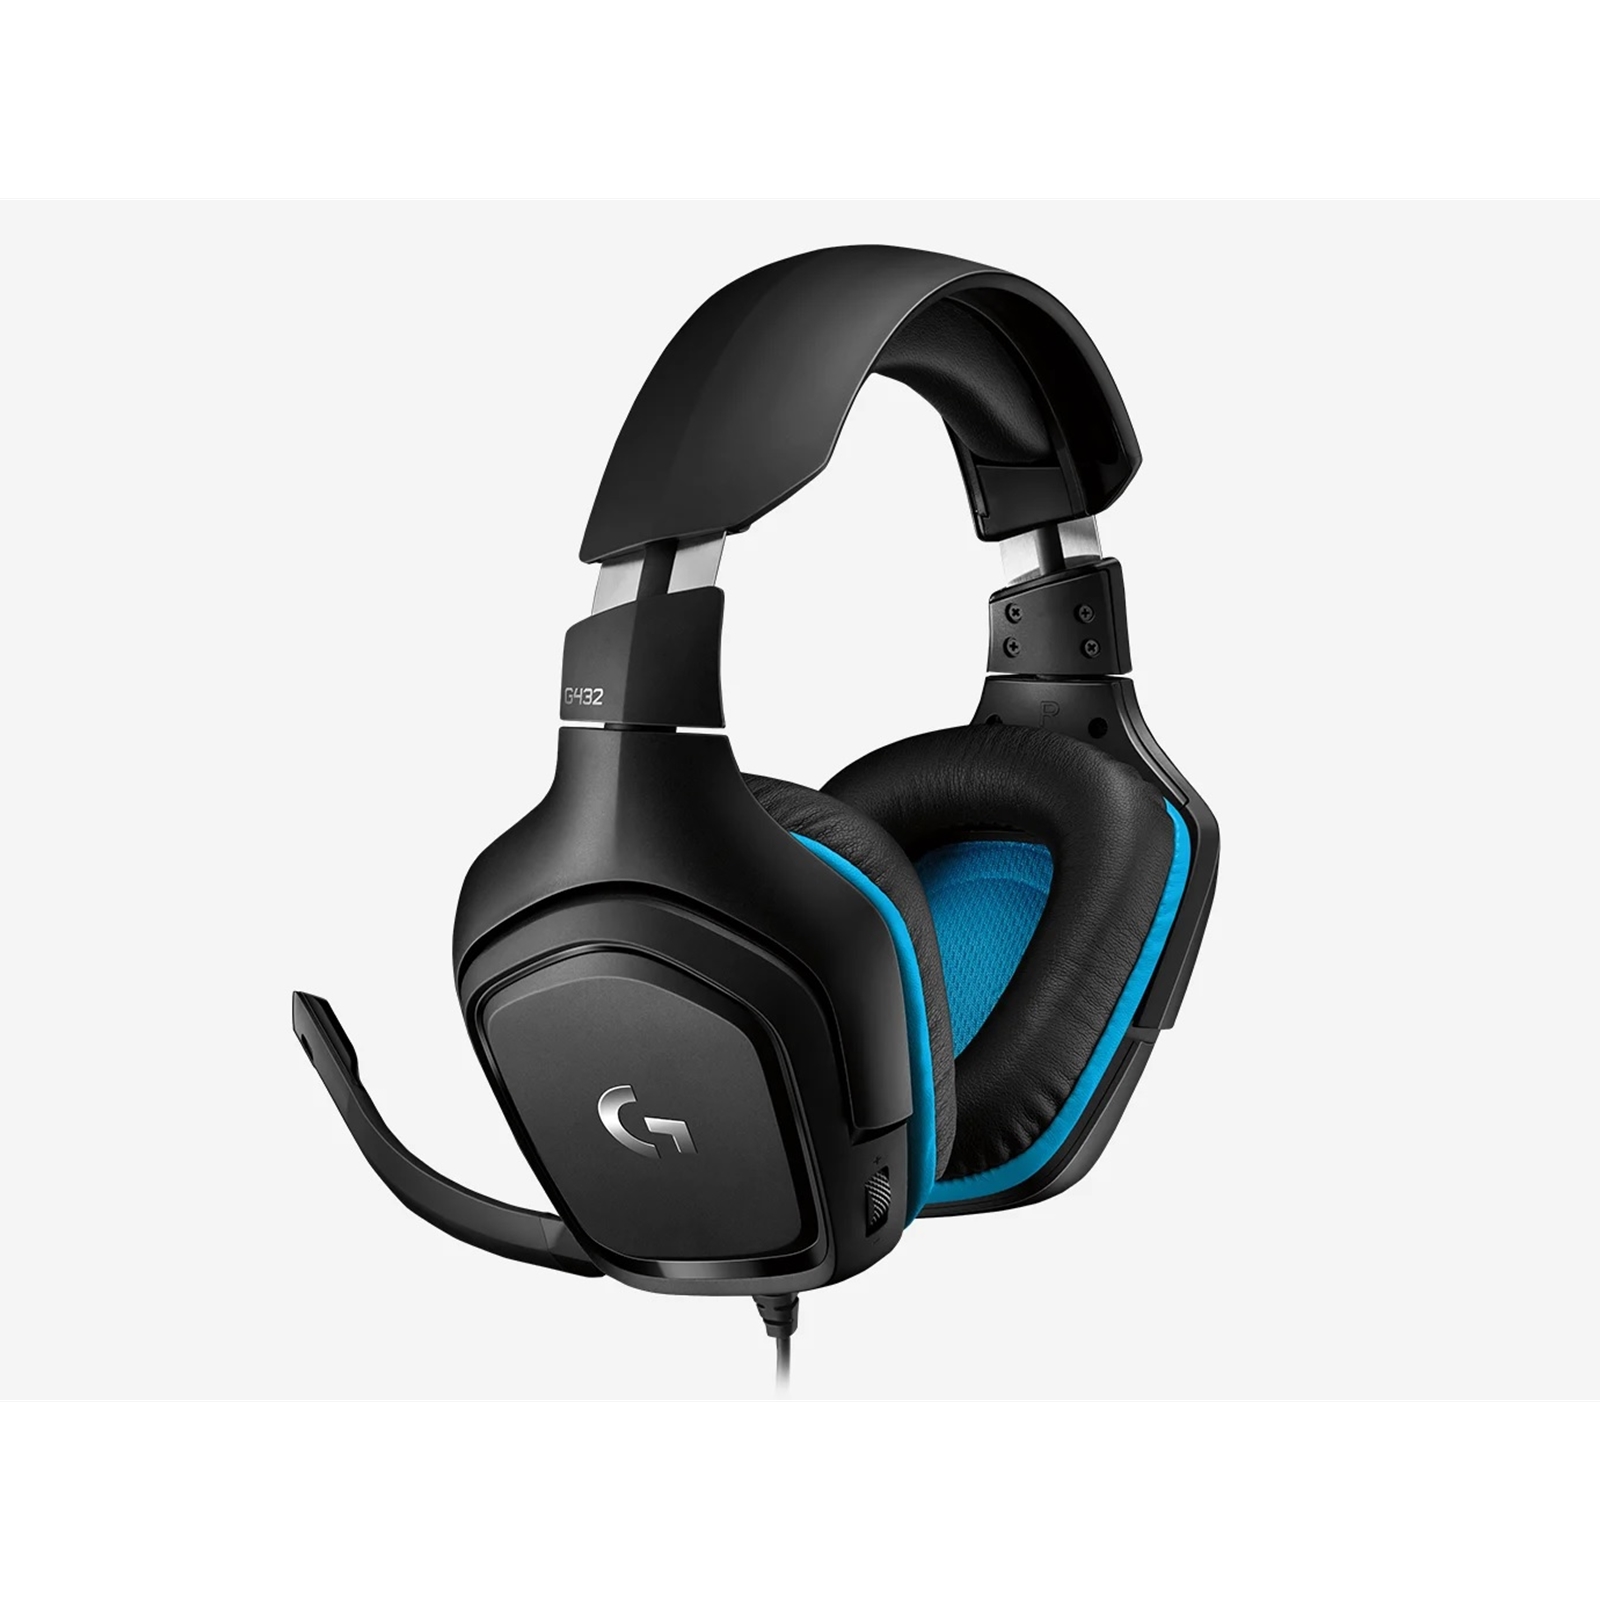 Logitech G432 Gaming Headset, 7.1 Virtual Surround Sound, Compatible with PC, Xbox, PS4, Switch or Mobile Device Via 3.5mm Connection or USB DAC, 50mm Audio Drivers, Enlarged 6mm Mic with Mute Feature